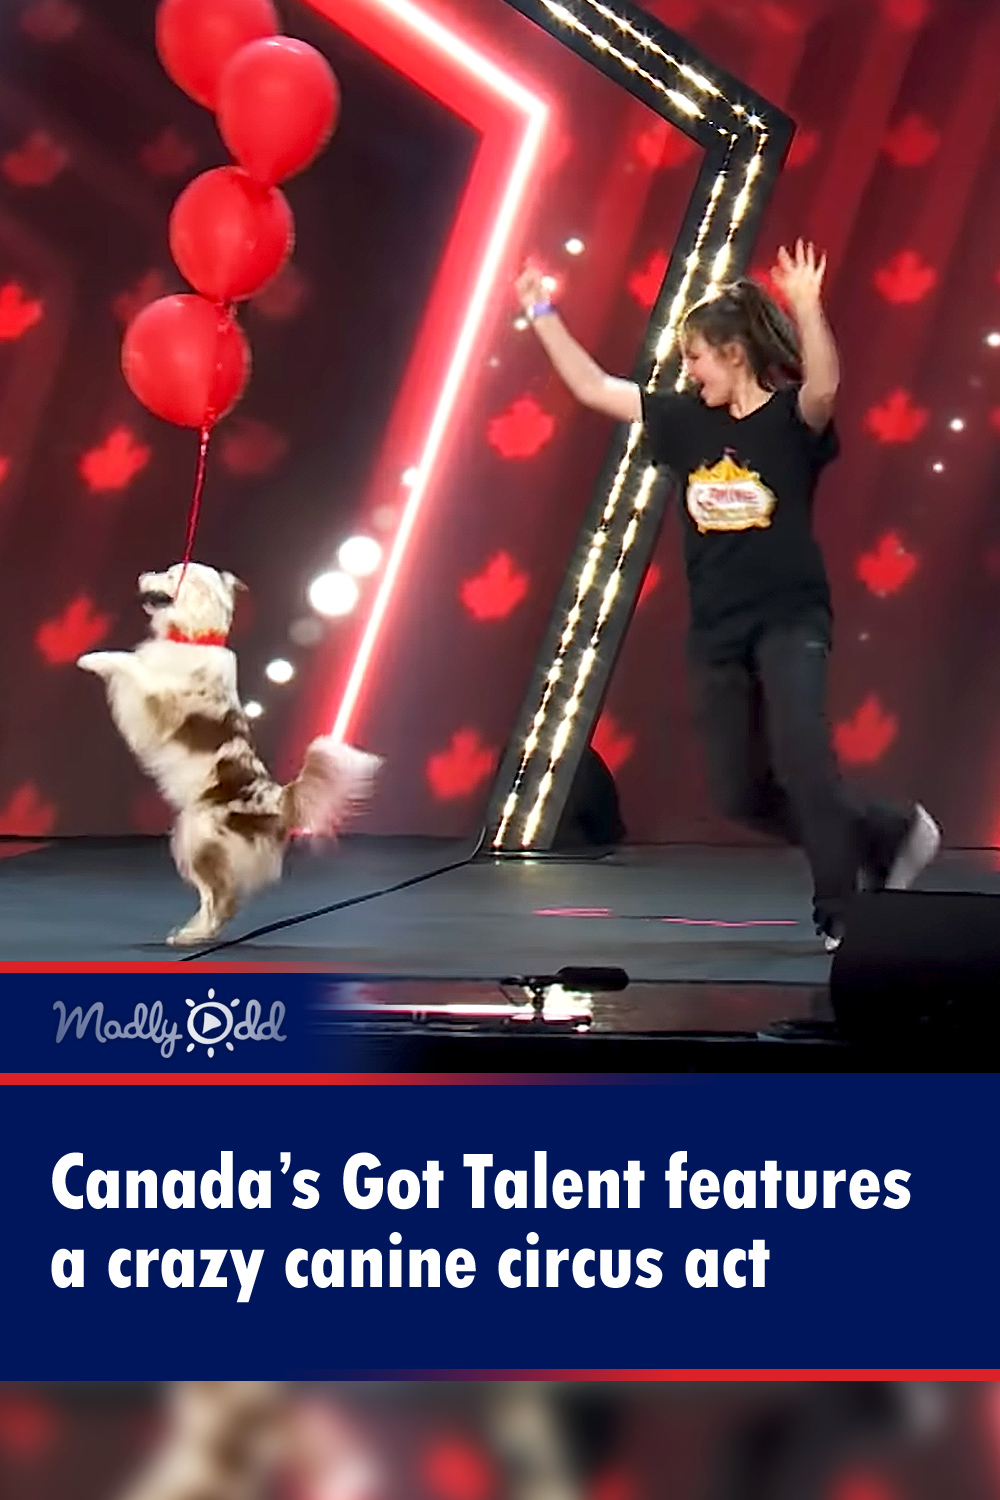 Canada’s Got Talent features a crazy canine circus act